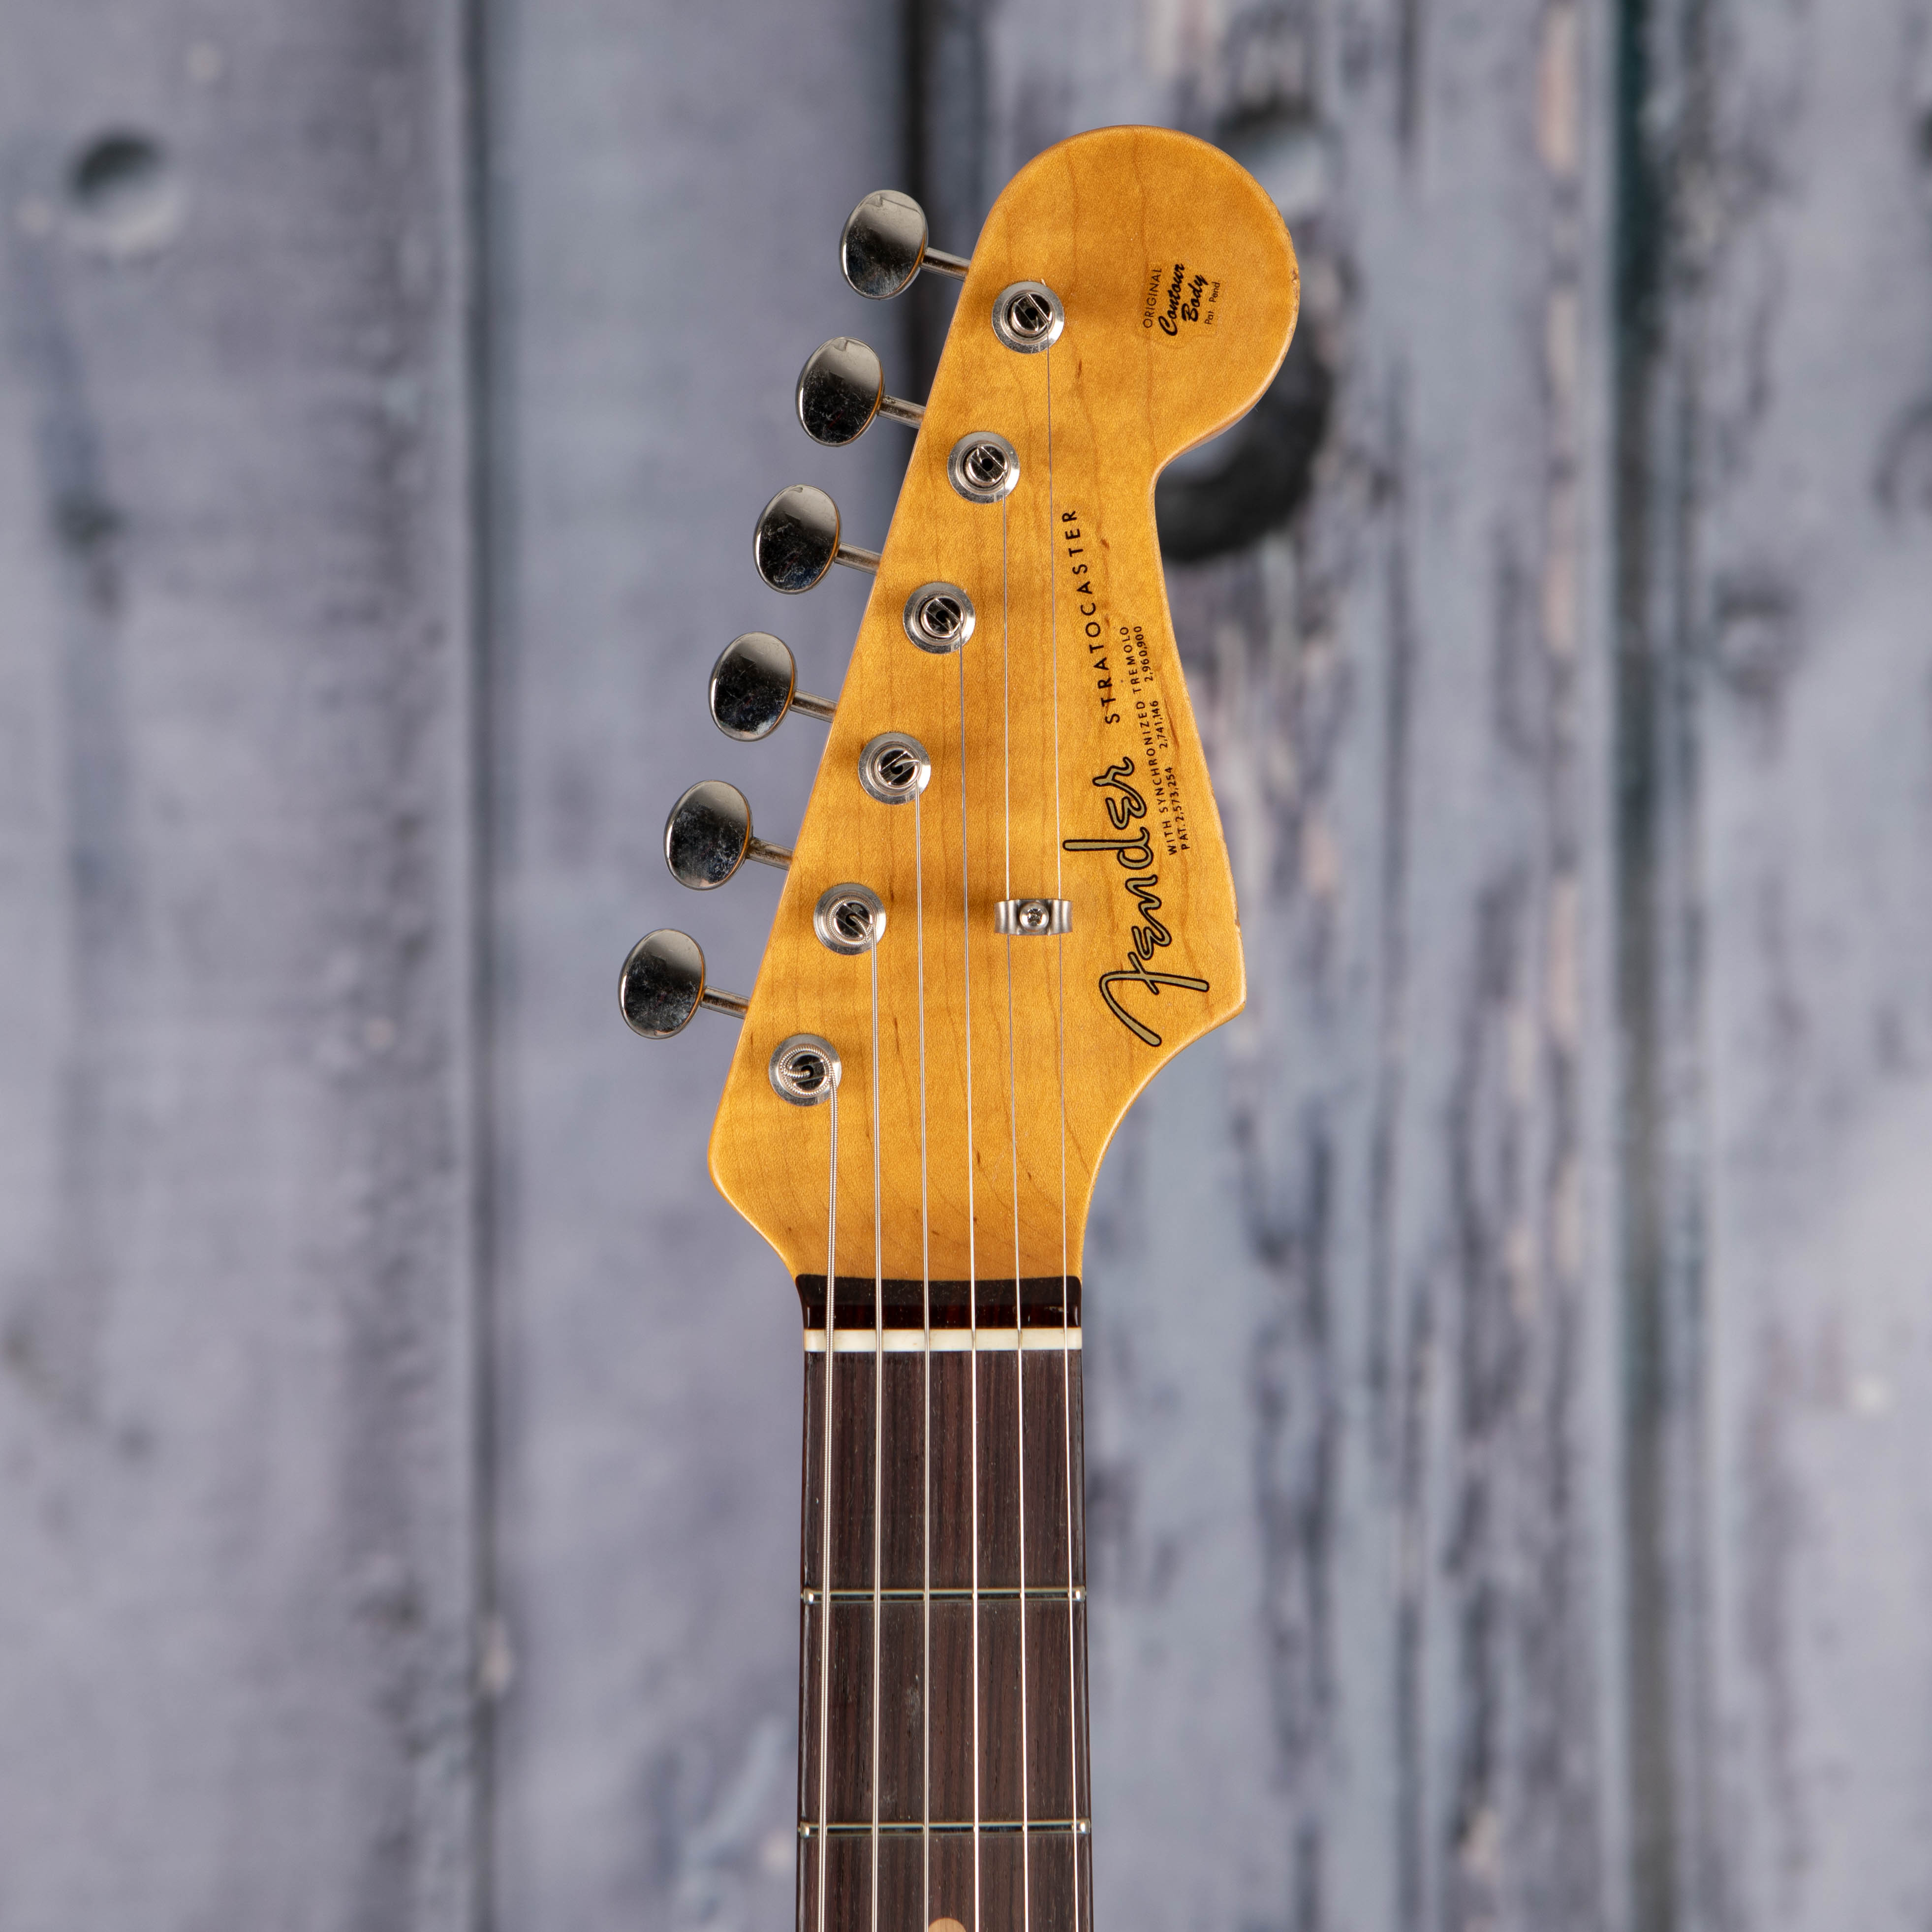 Fender Custom Shop Limited 1963 Stratocaster Journeyman Relic Closet Classic Electric Guitar, Aged Sonic Blue, front headstock